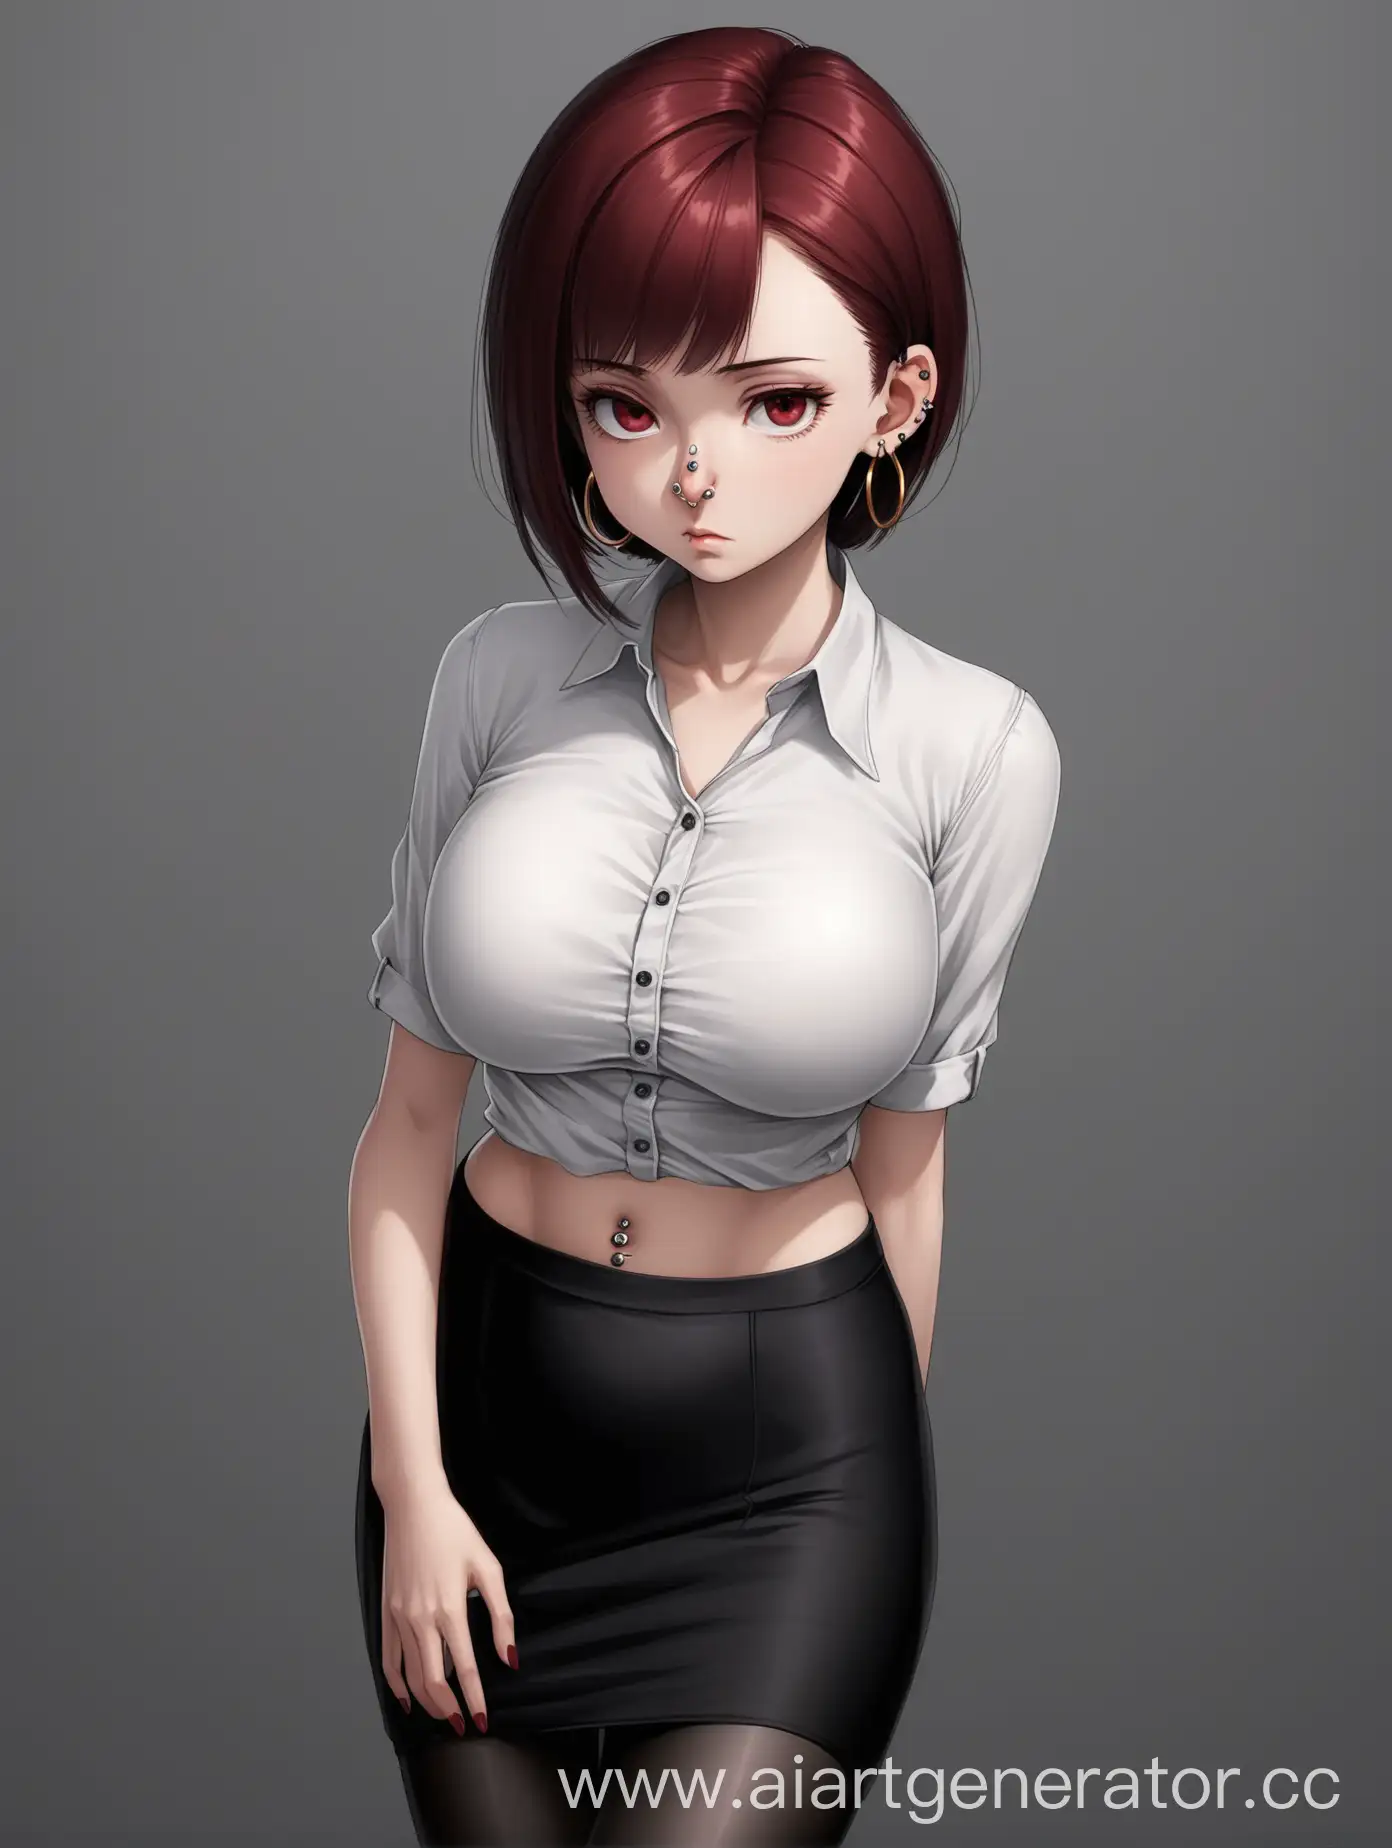 Young-Woman-with-Red-Hair-and-Piercings-in-Office-Attire